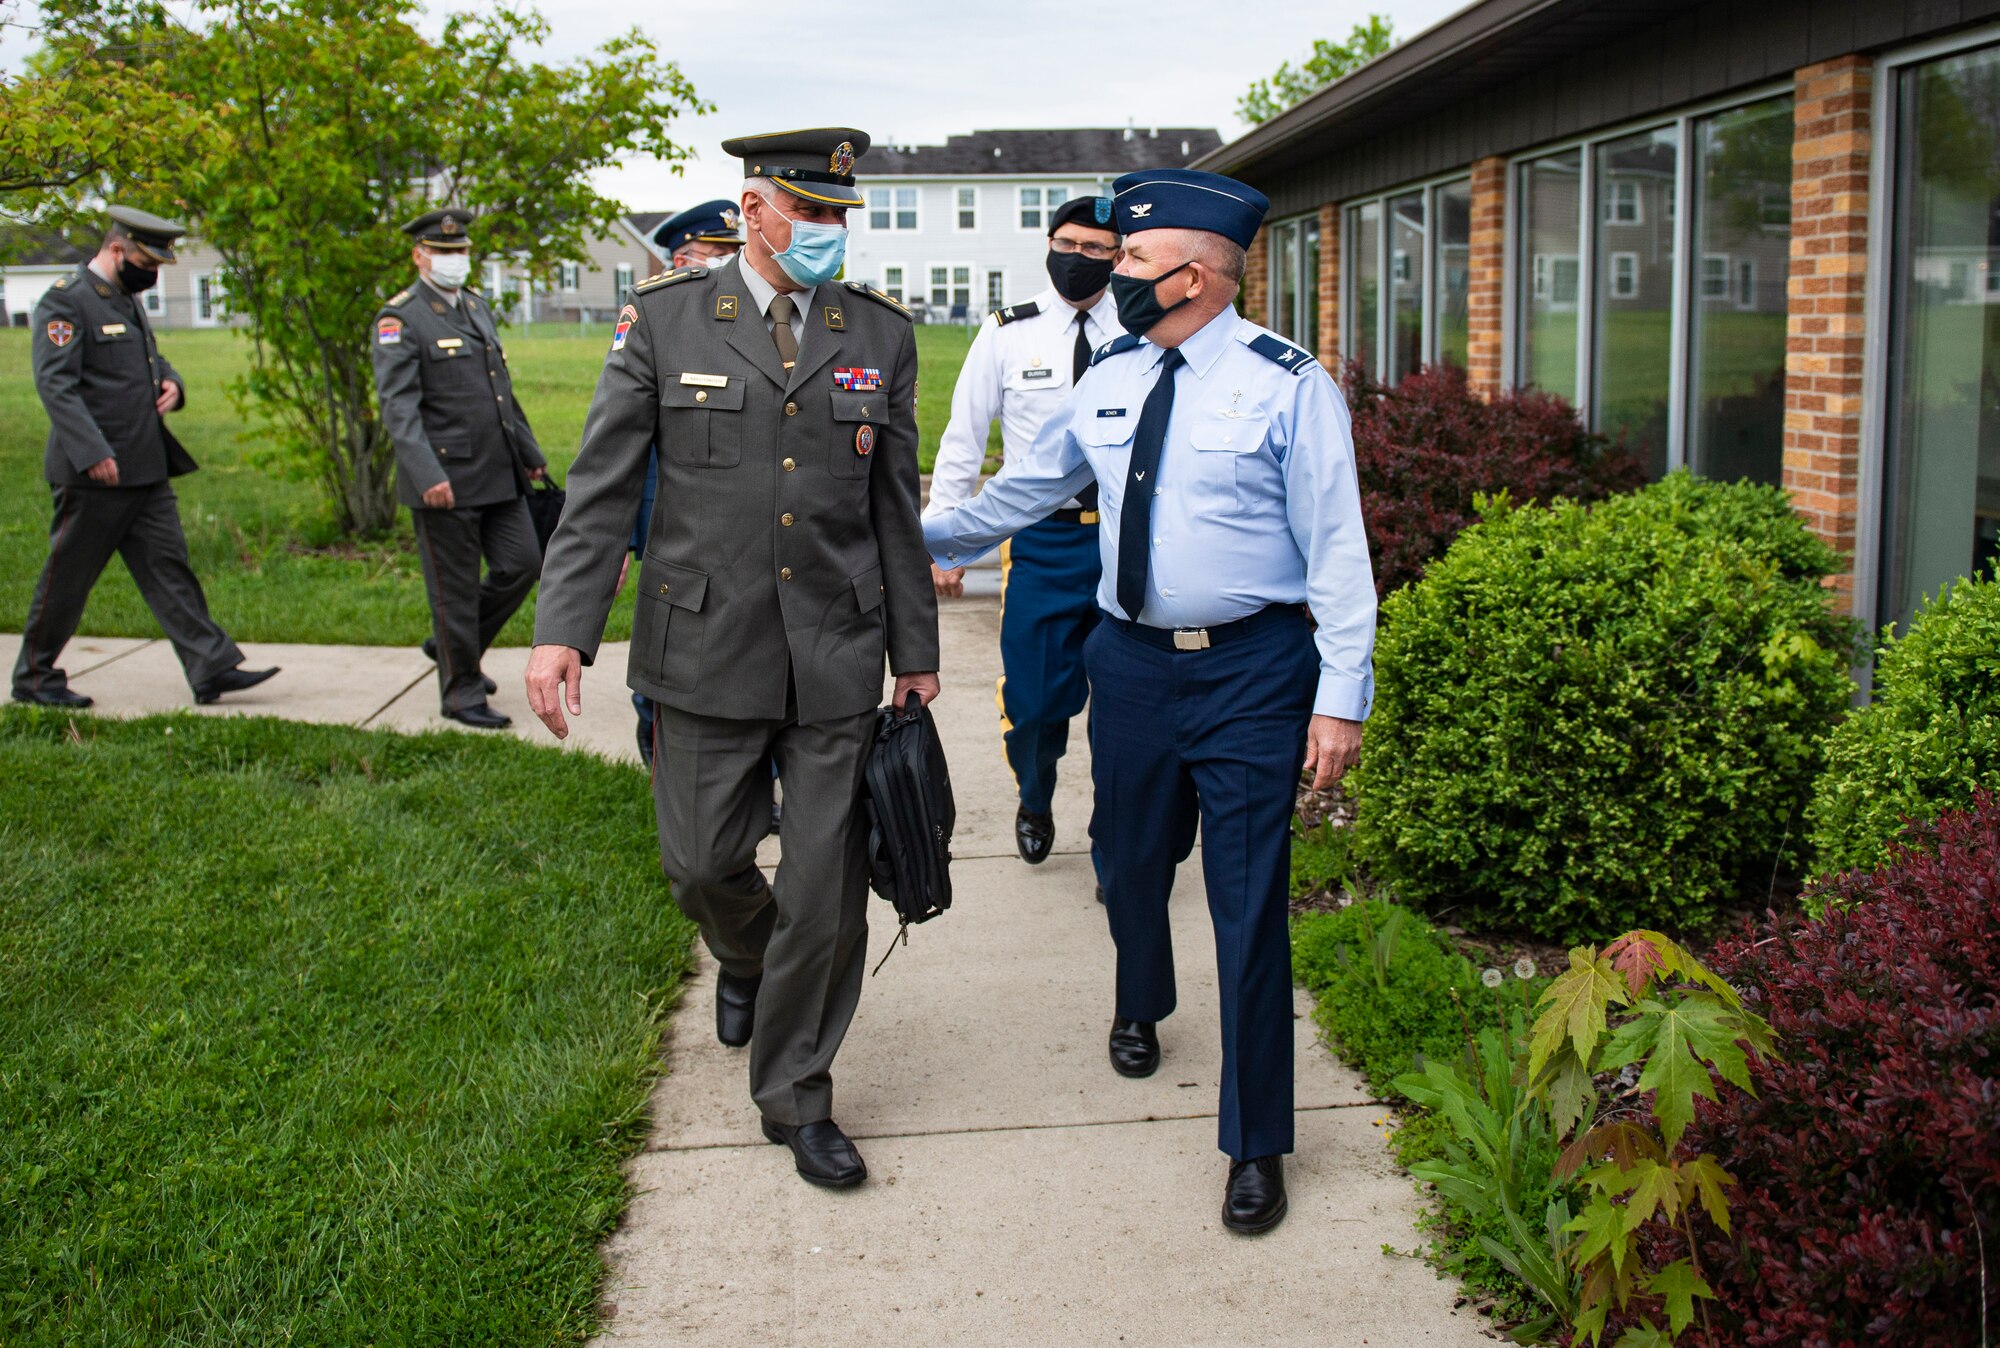 Col. Sasa Milutinovic, head of religious services for the Serbian Armed Forces, and Col. Kim Bowen, 88th Air Base Wing chaplain, talk as they walk into the Prairies Chapel Community Center at Wright-Patterson Air Force Base, Ohio, May 11, 2021. Milutinovic, along with four other Serbian chaplains, visited the base with Col. Daniel Burris, chaplain for the Ohio National Guard’s Special Troops Command, as well as others in the Ohio chaplain delegation. (U.S. Air Force Photo by Wesley Farnsworth)